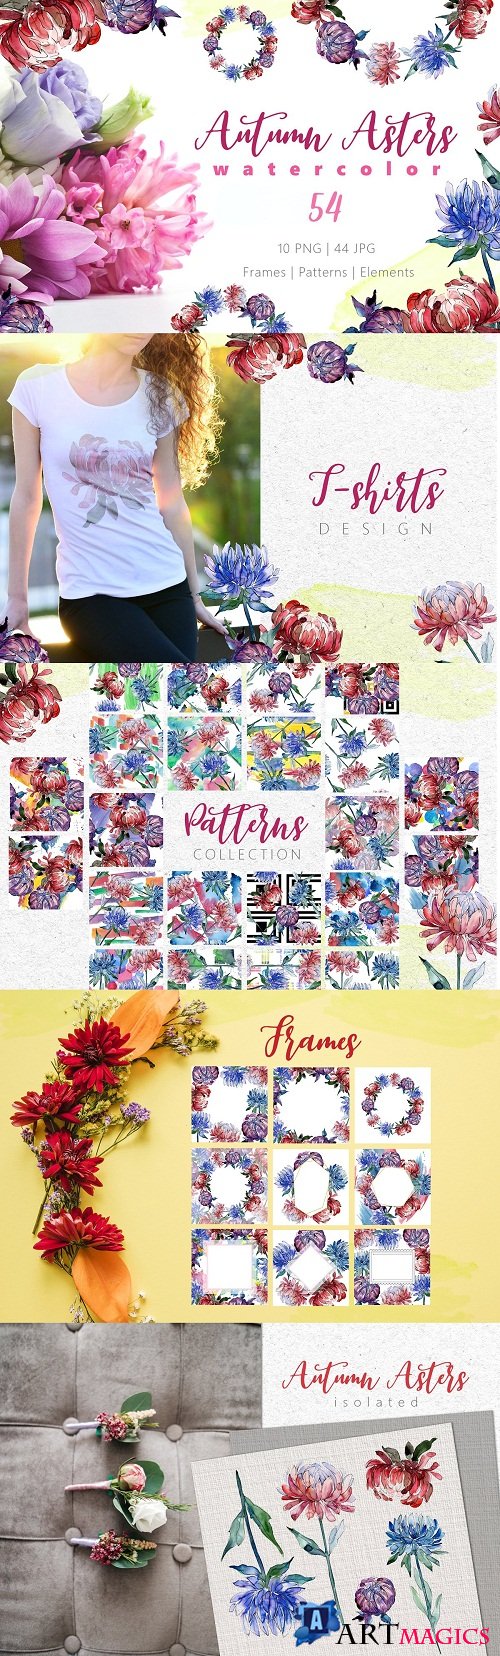 Autumn Asters Watercolor png - 3453032